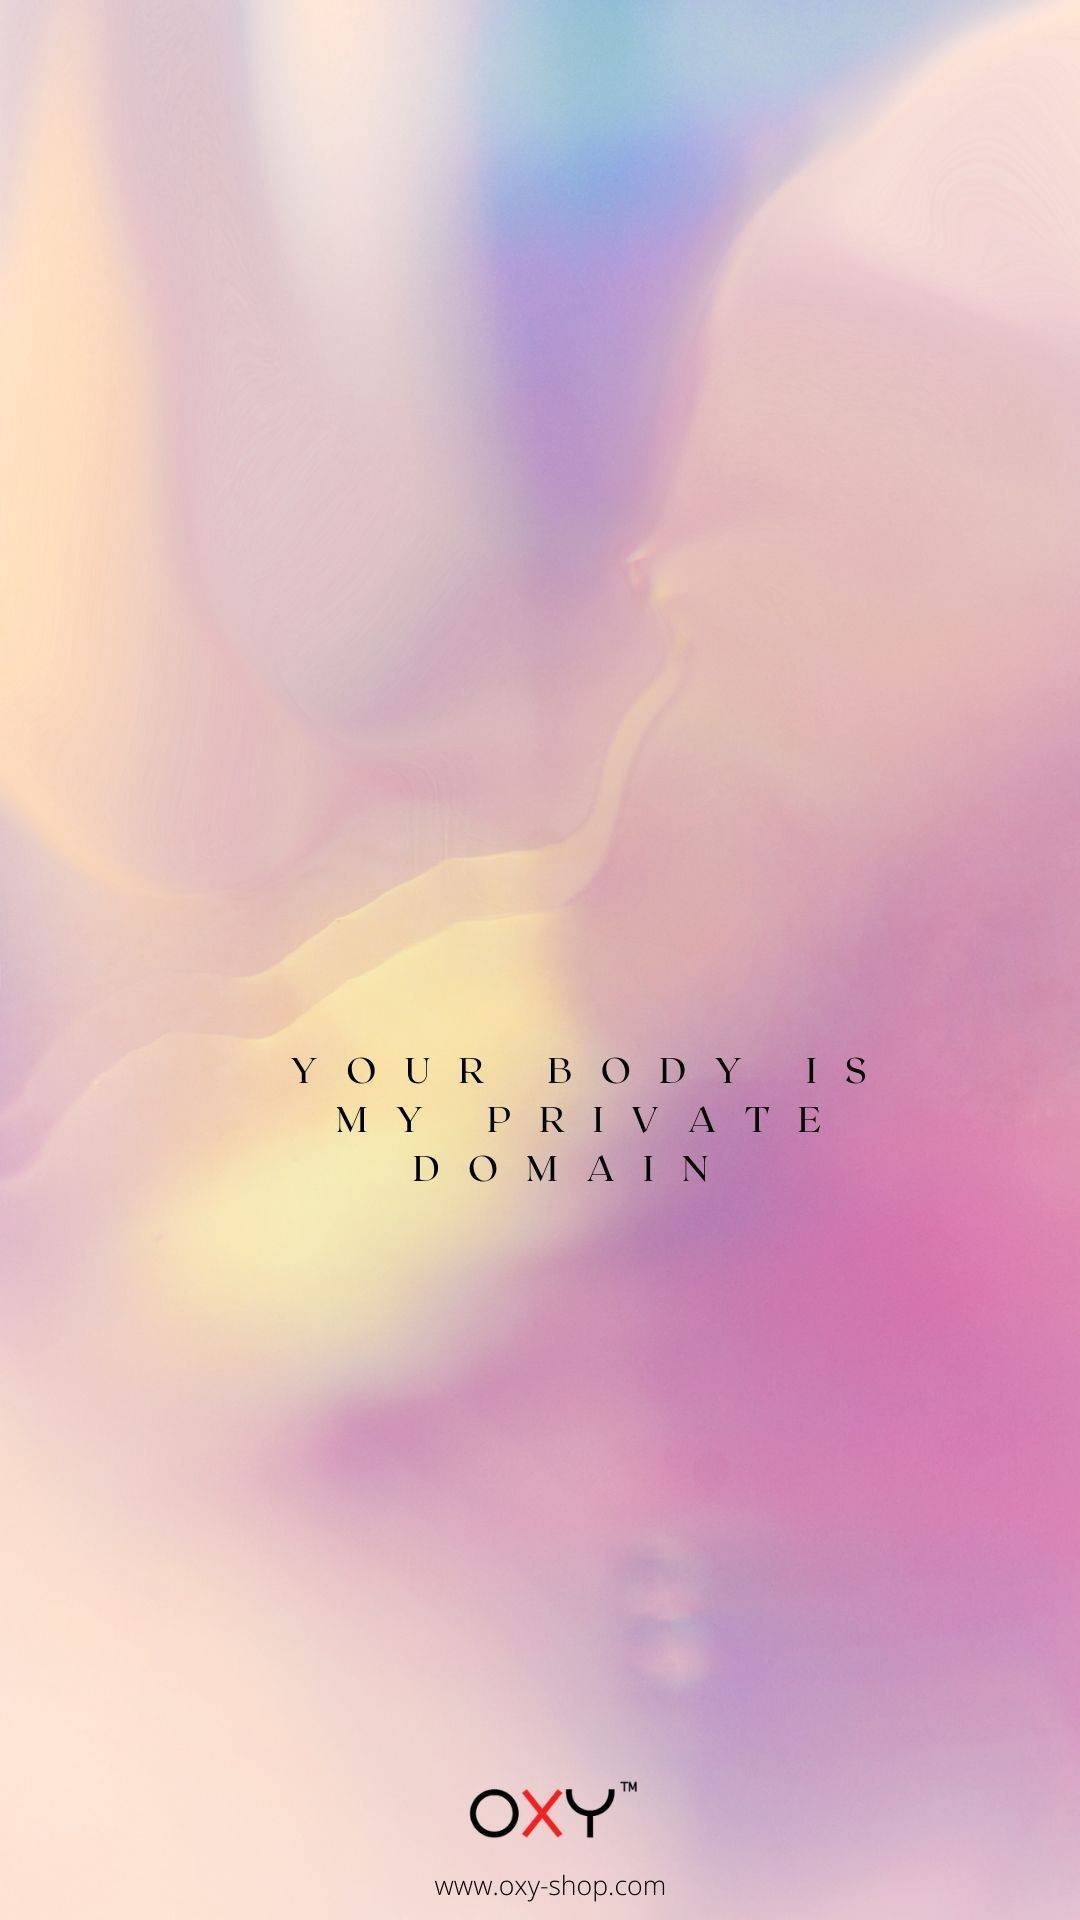 Your body is my playground. - BDSM wallpaper